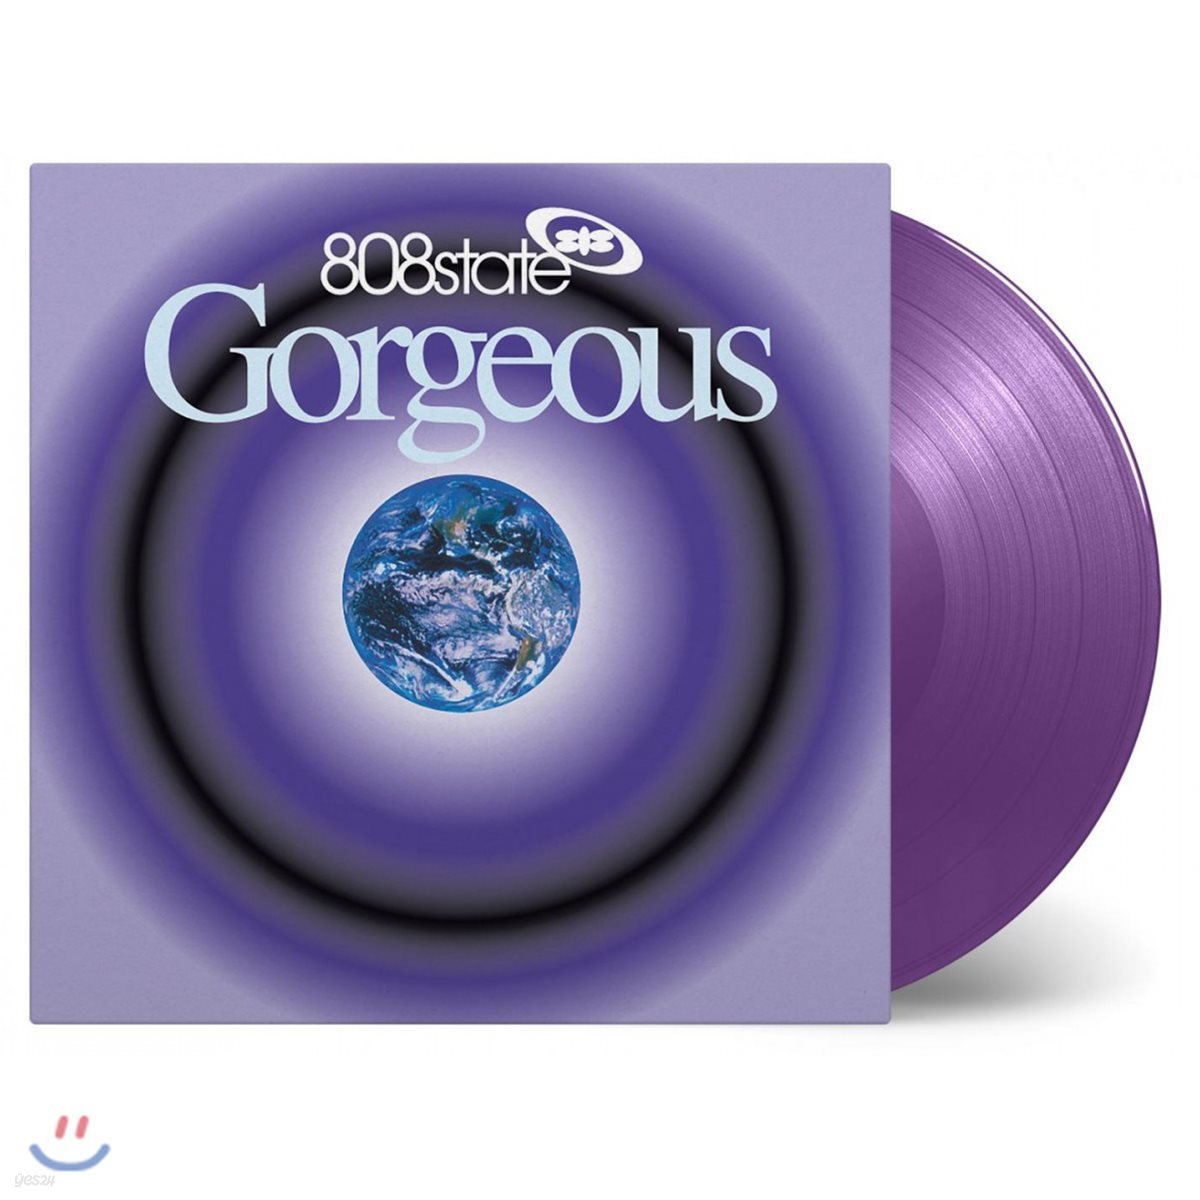 808 State (808 스테이트) - Gorgeous (Expanded) [퍼플 컬러 2LP]